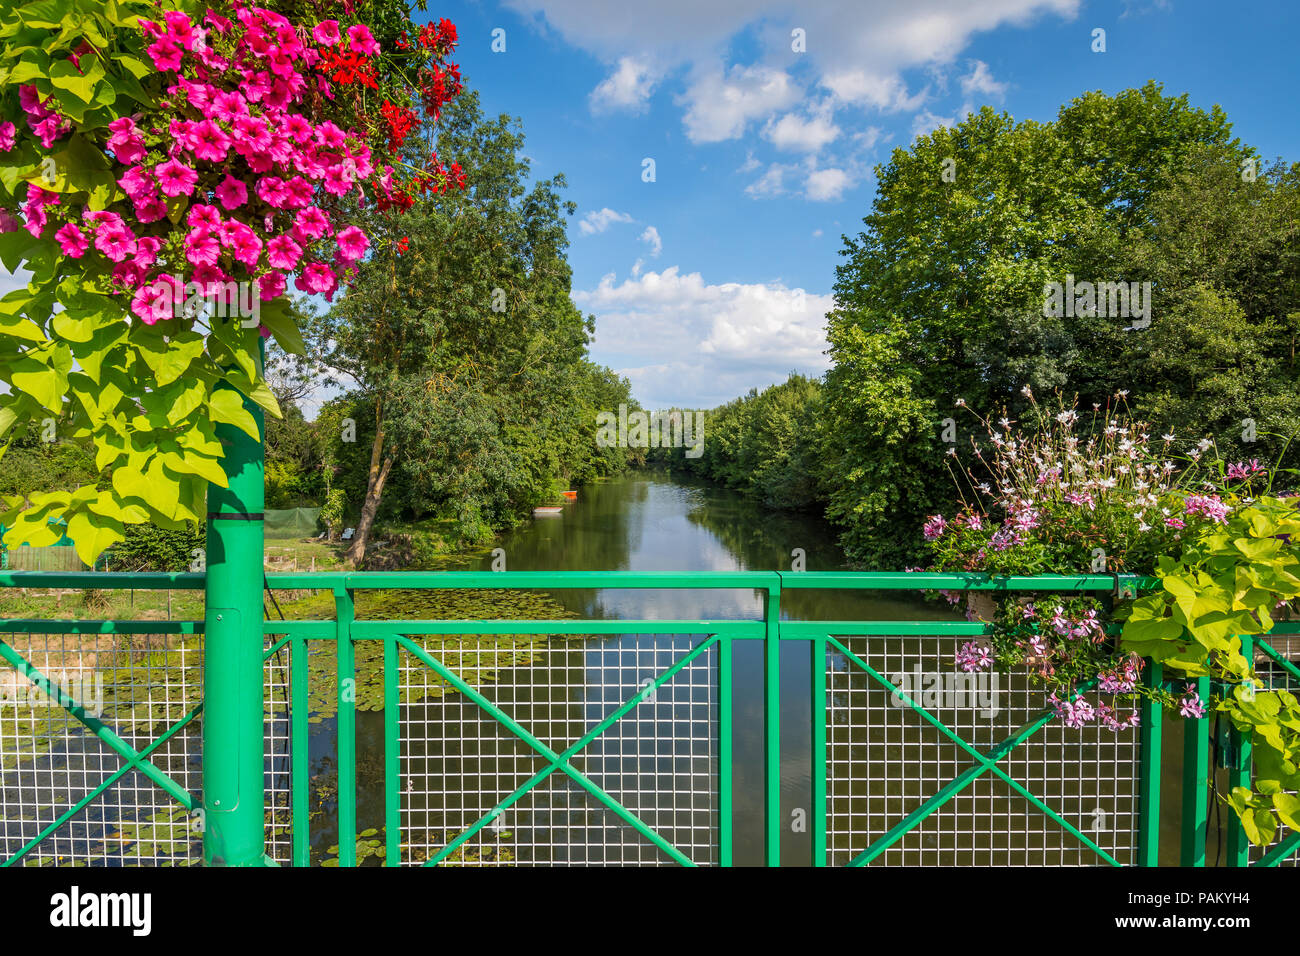 Railing and flower display on bridge across river Claise, Abilly, Indre-et-Loire, France. Stock Photo